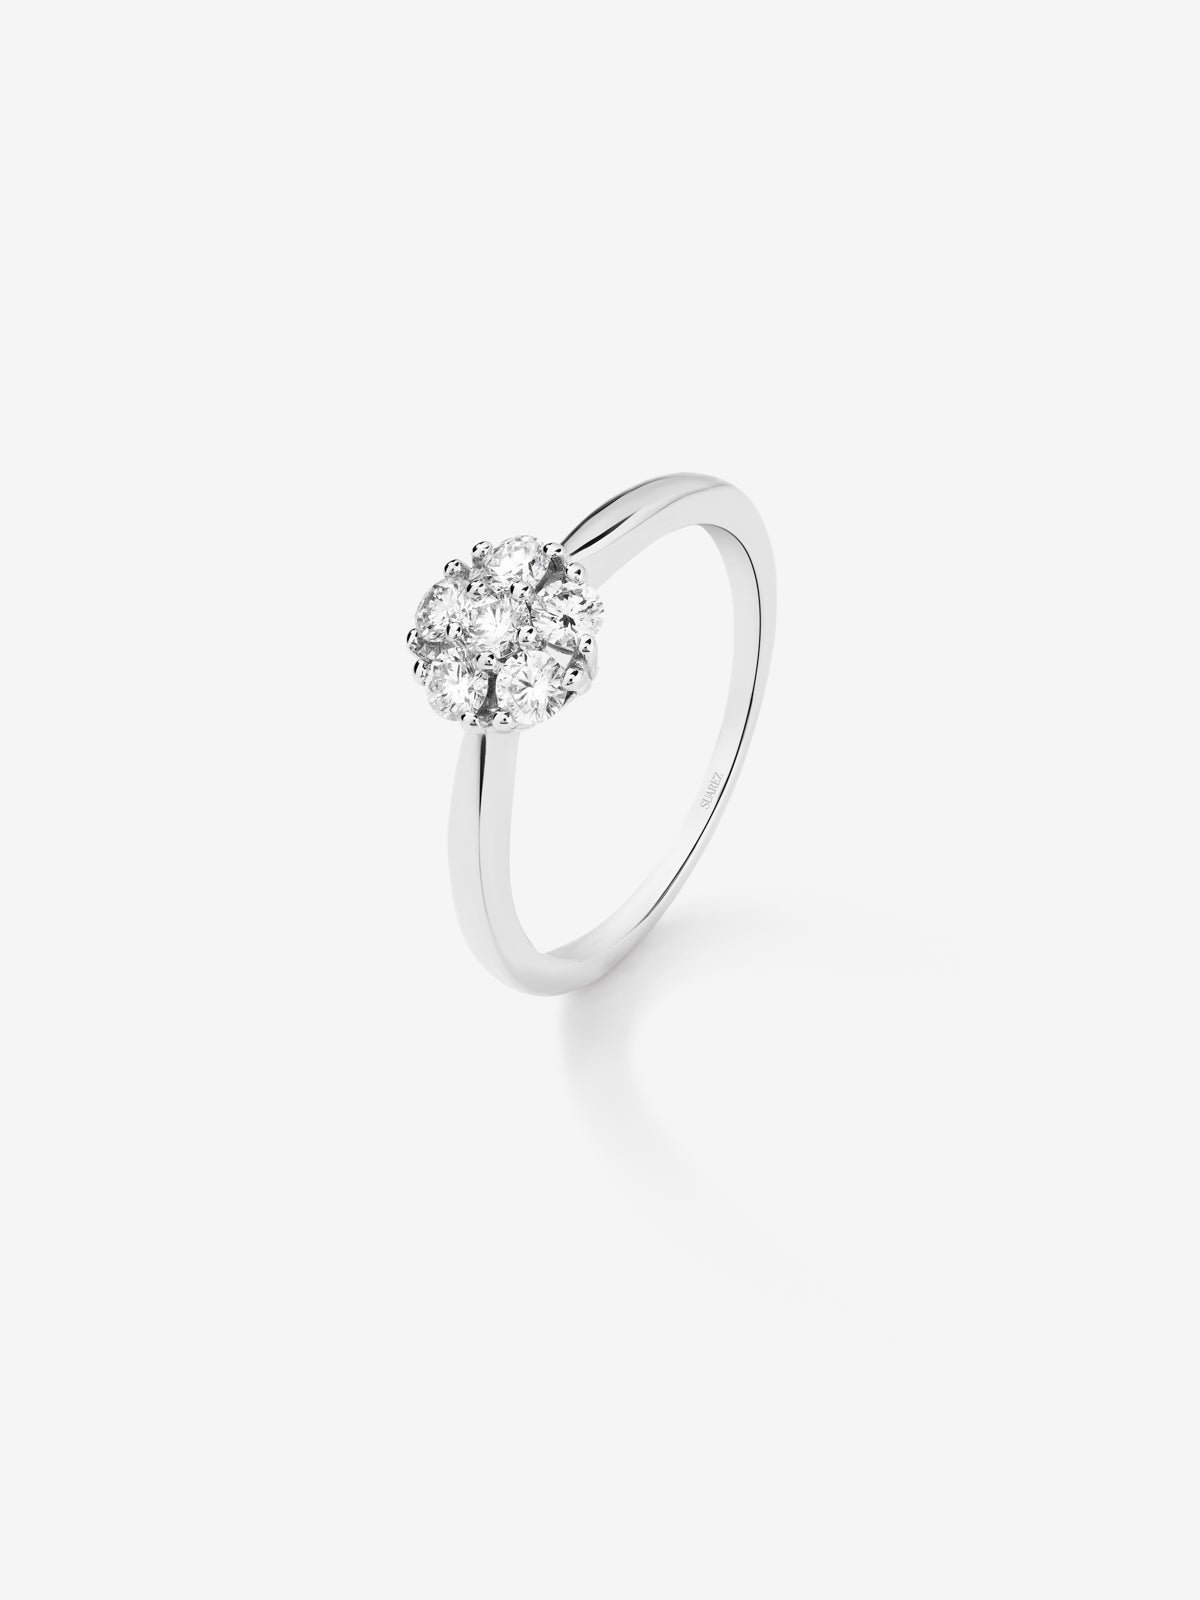 18K white gold ring with a border of 6 brilliant-cut diamonds with a total of 0.4 cts